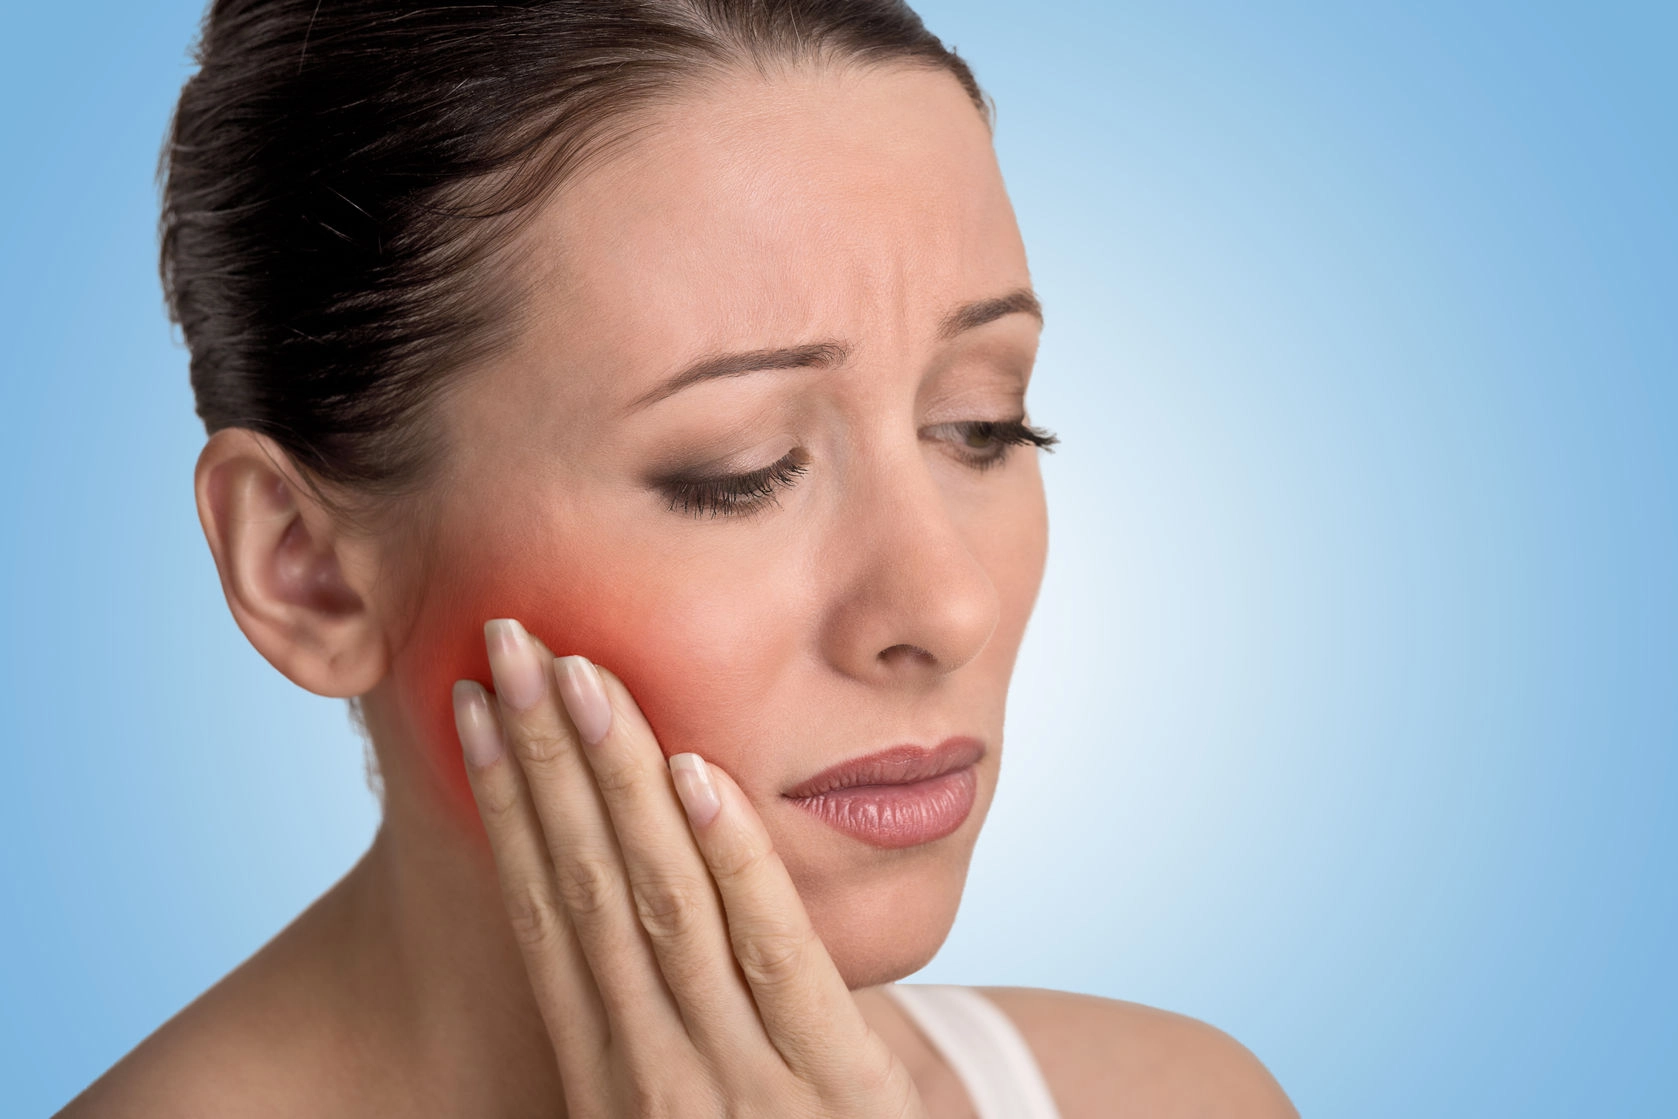 Symptoms and complications of a tooth abscess